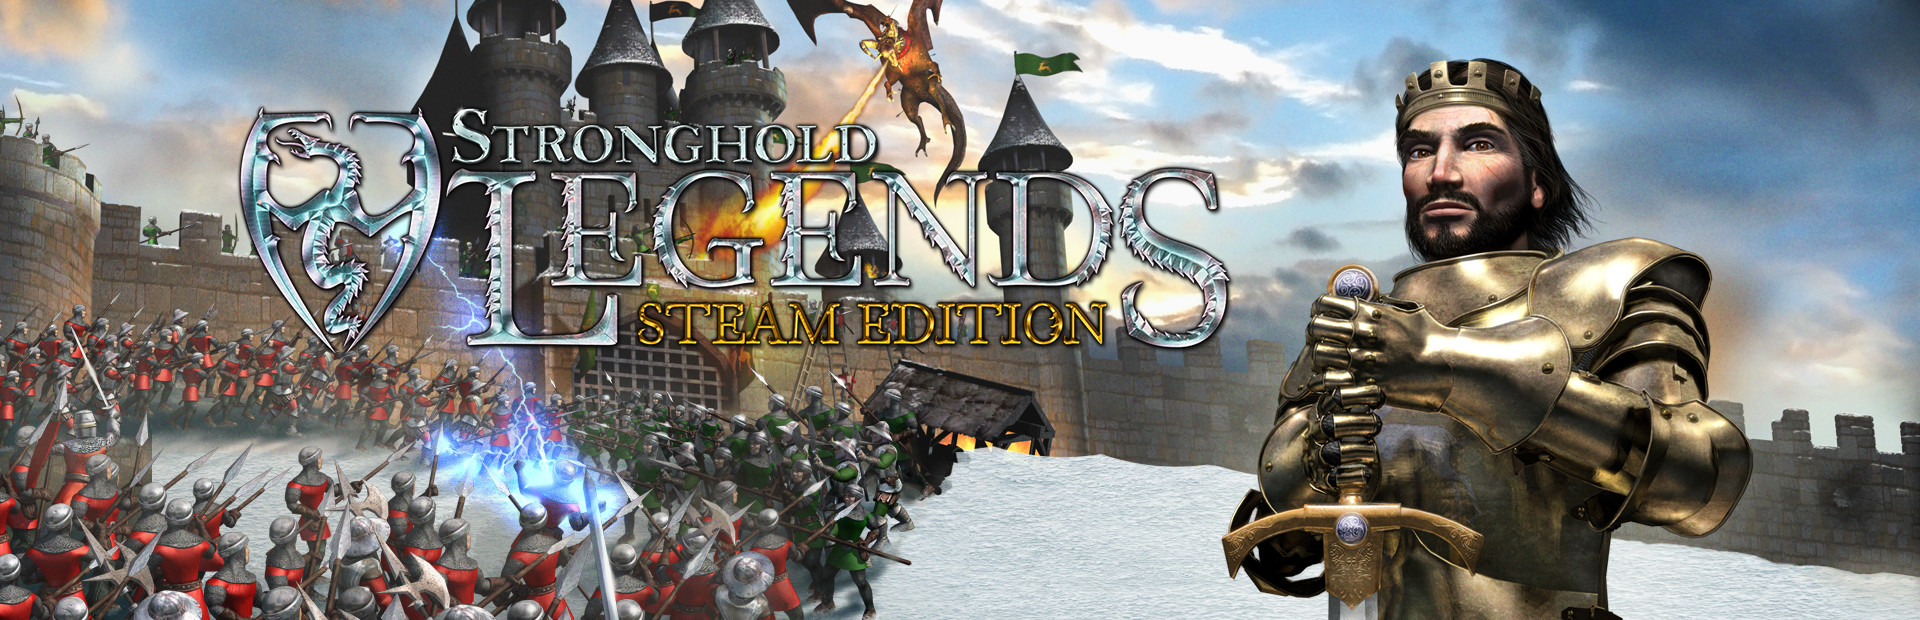 Stronghold Legends: Steam Edition cover image